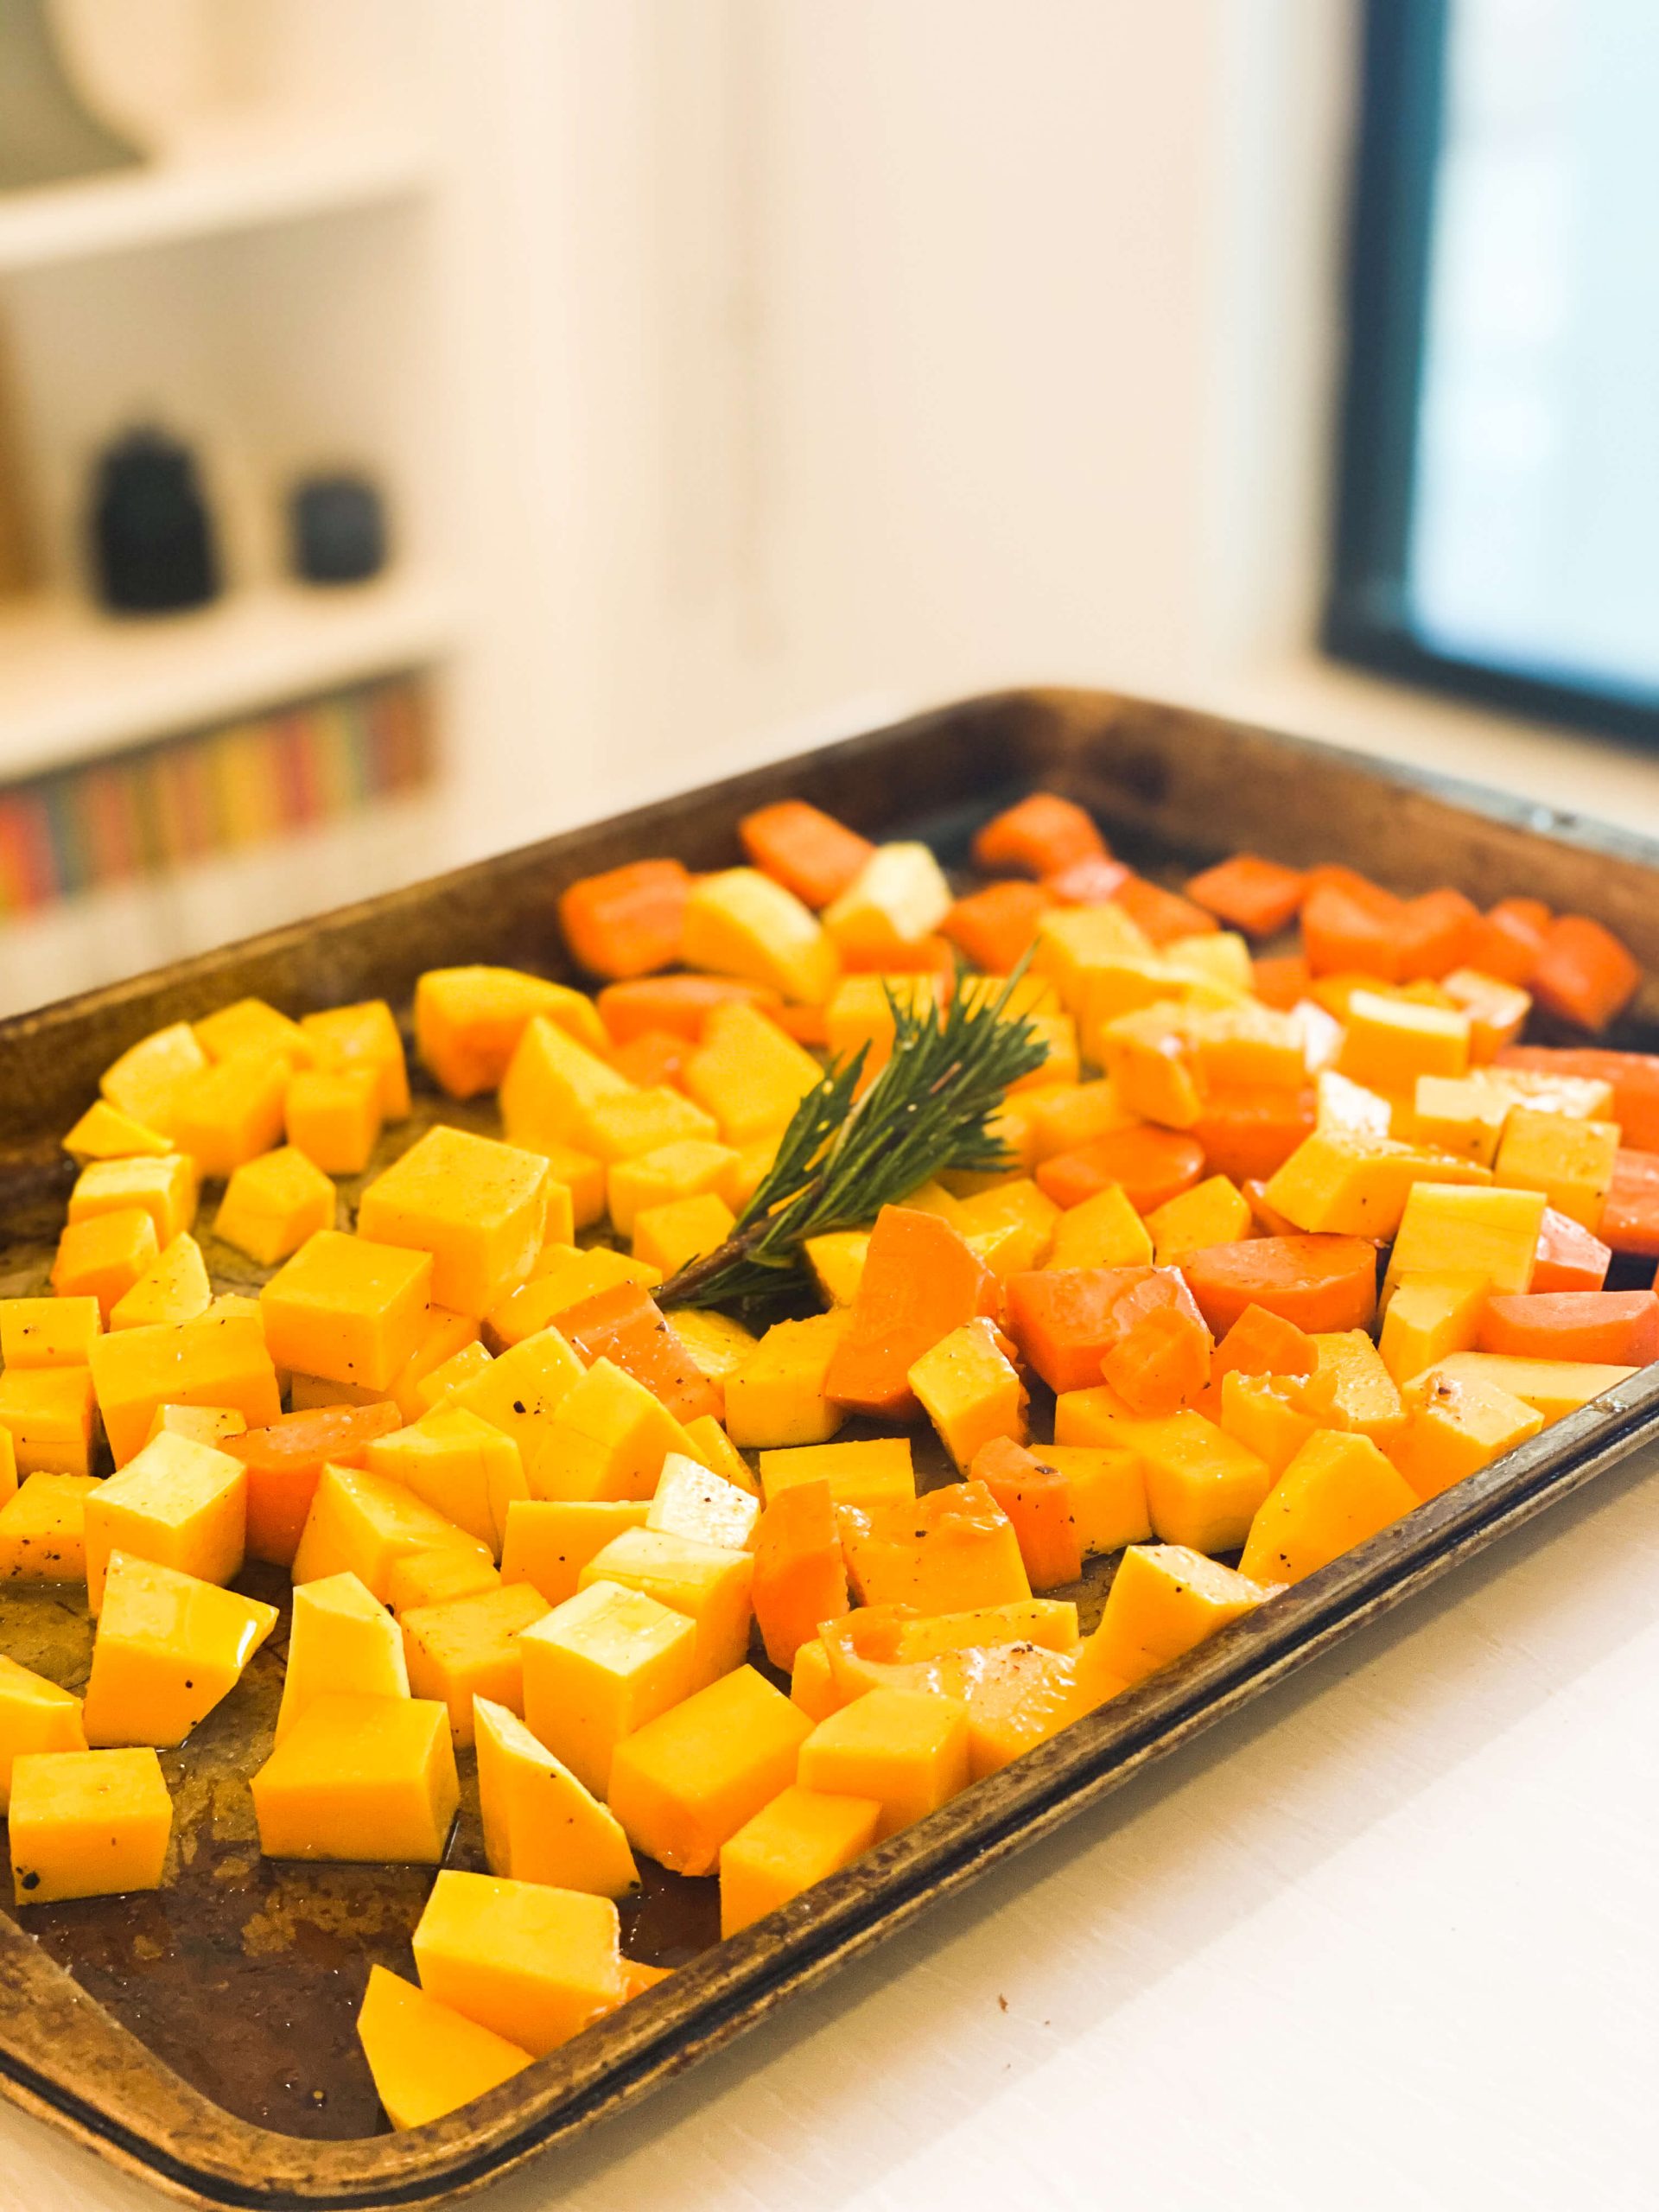 Butternut squash, carrots, rosemary and ginger tossed in olive oil slat and pepper. 